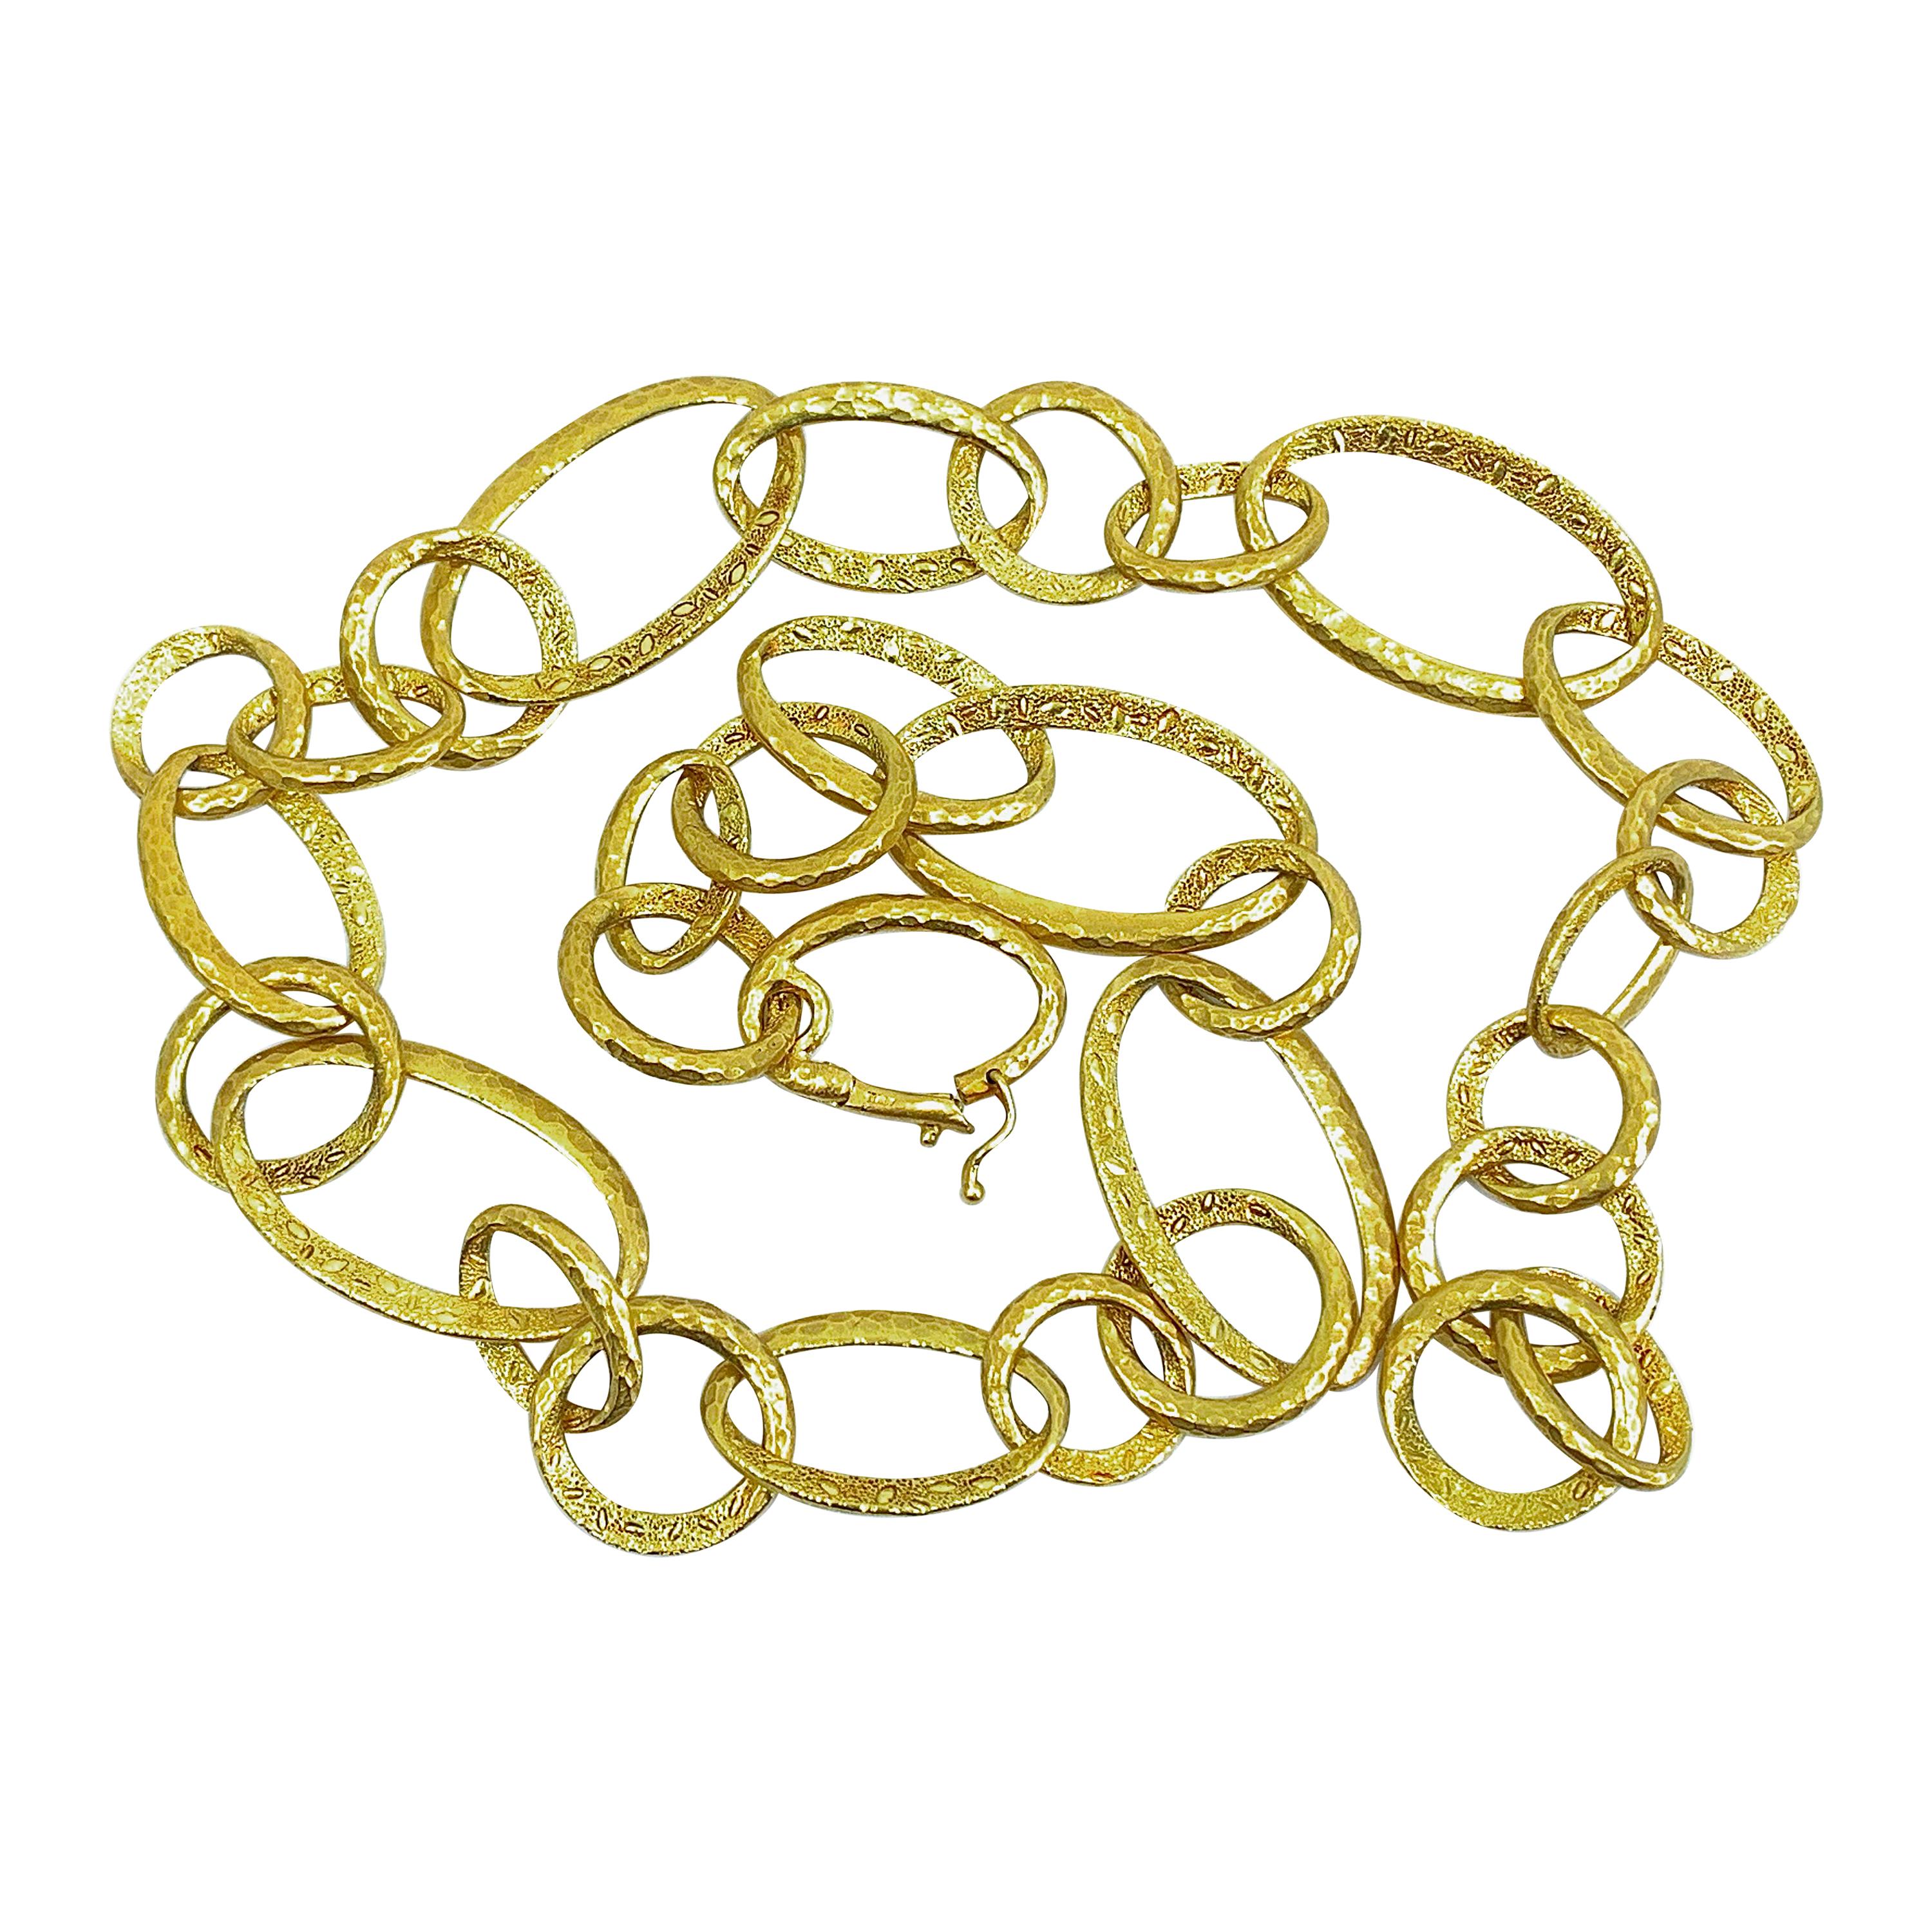 Italian Chain Necklace with Oversized and Textured Links in 18 Karat Yellow Gold